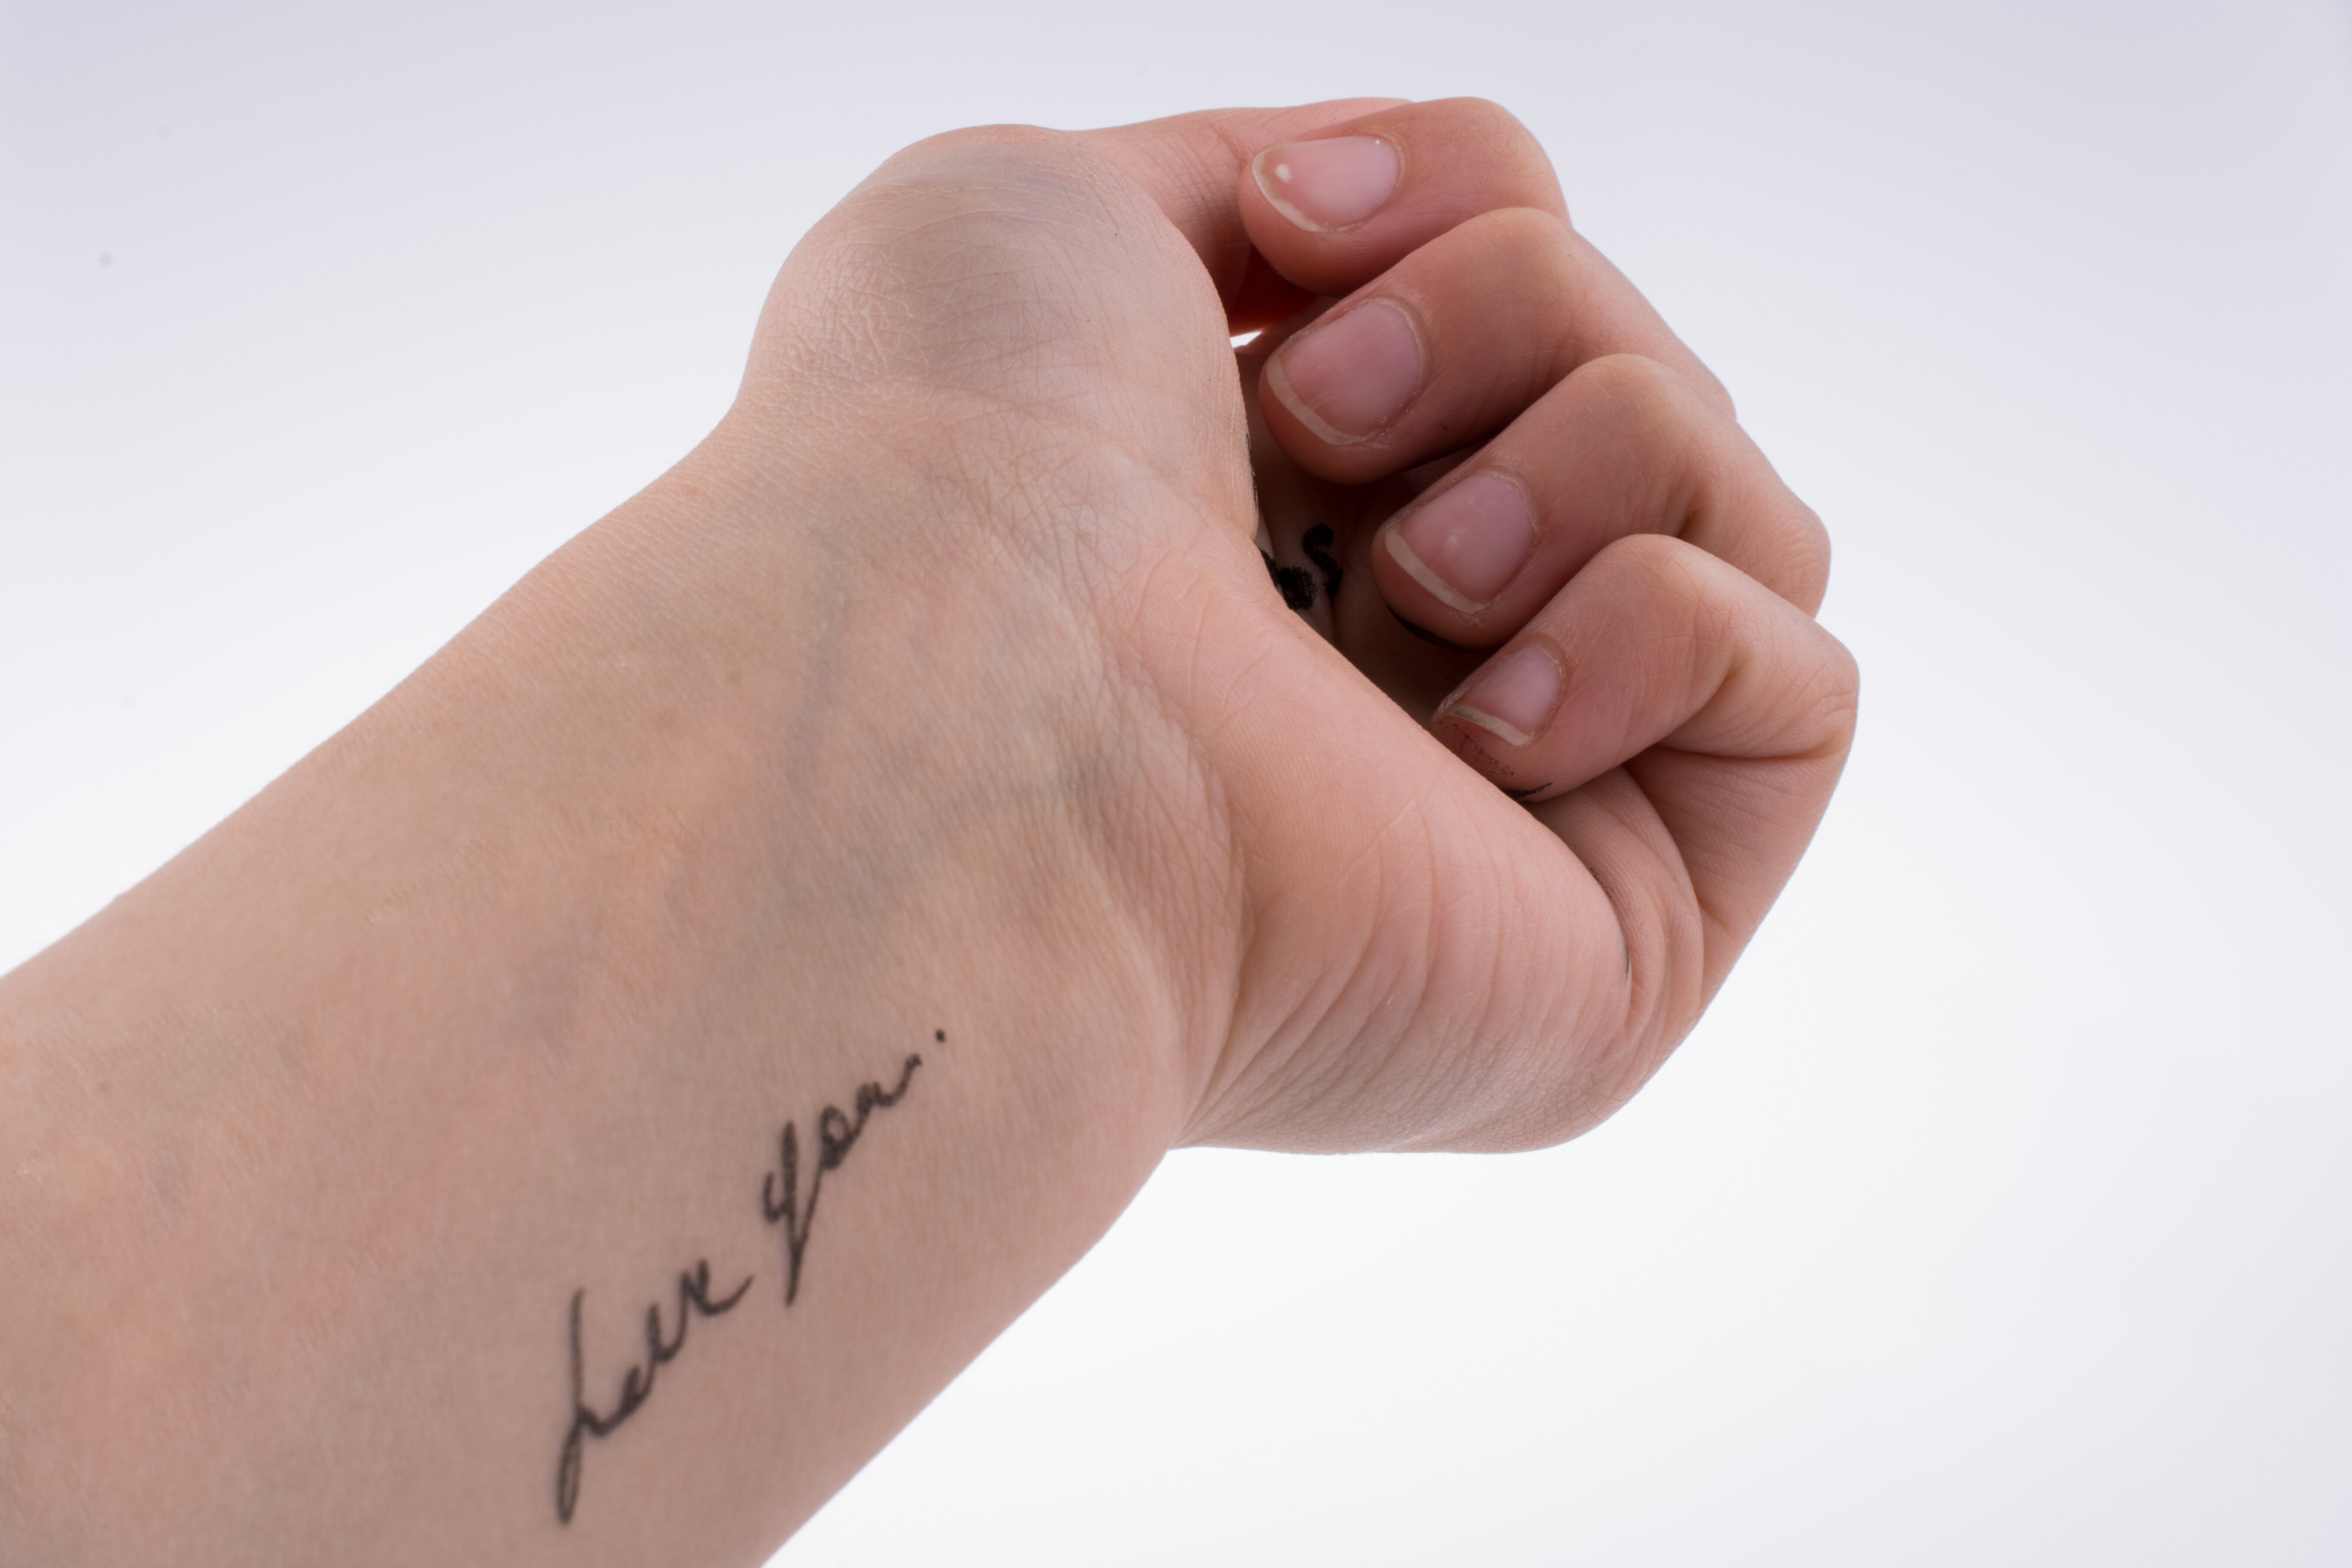 How Memorial Tattoos Can Help With The Grieving Process